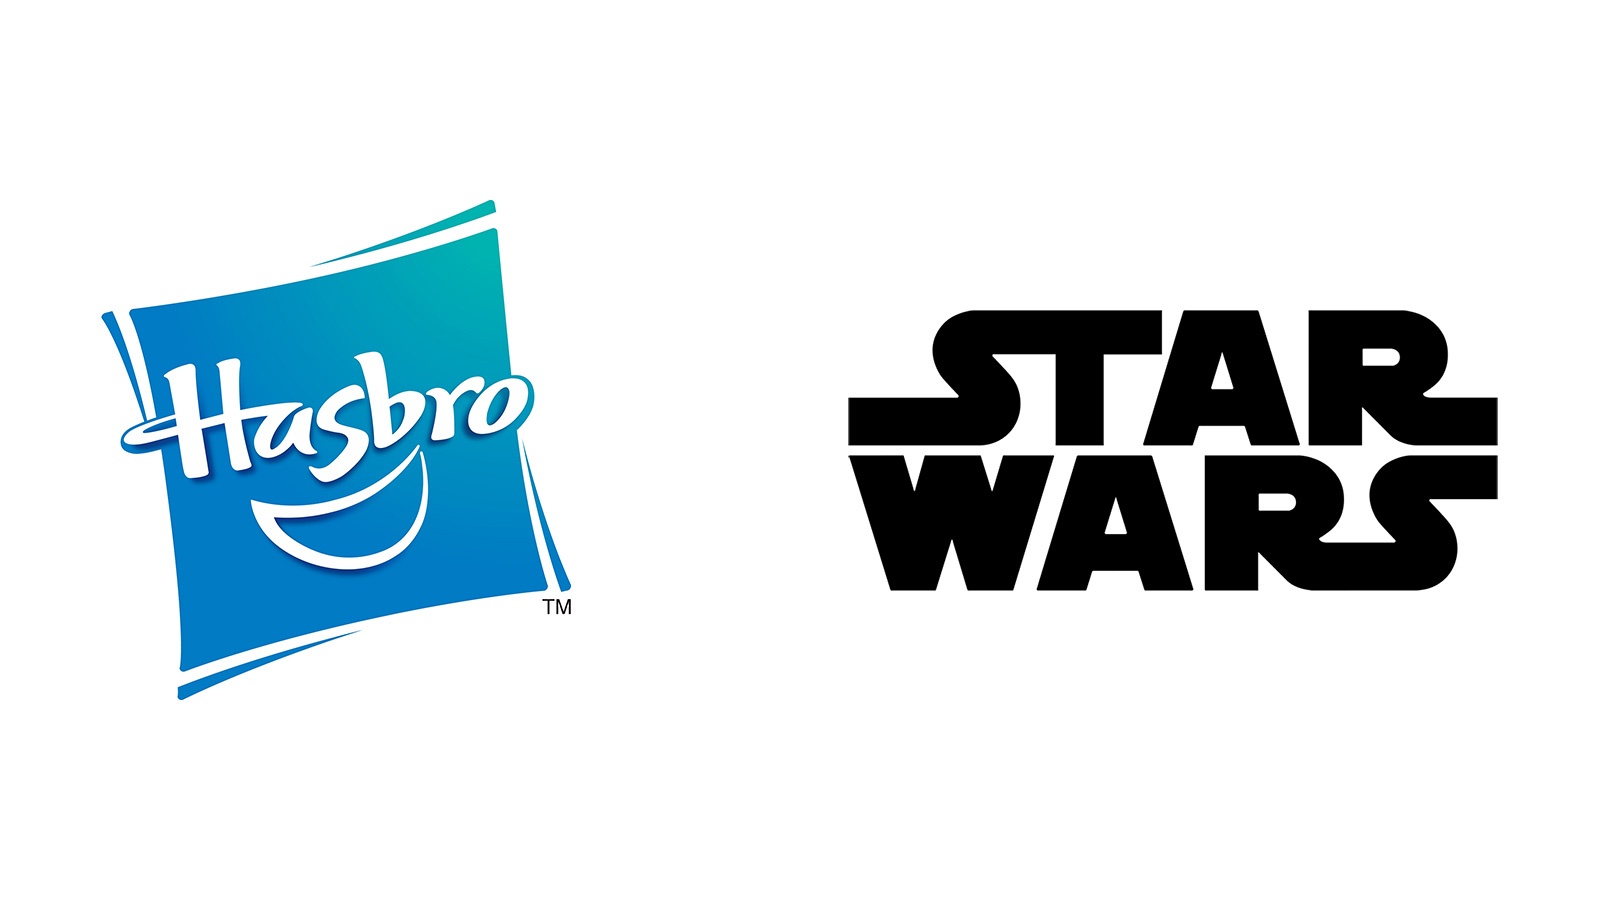 Q&A With Hasbro’s Star Wars Team 2/10/22 - Submit Questions About Next Weeks Livestream Reveals Or Previous News